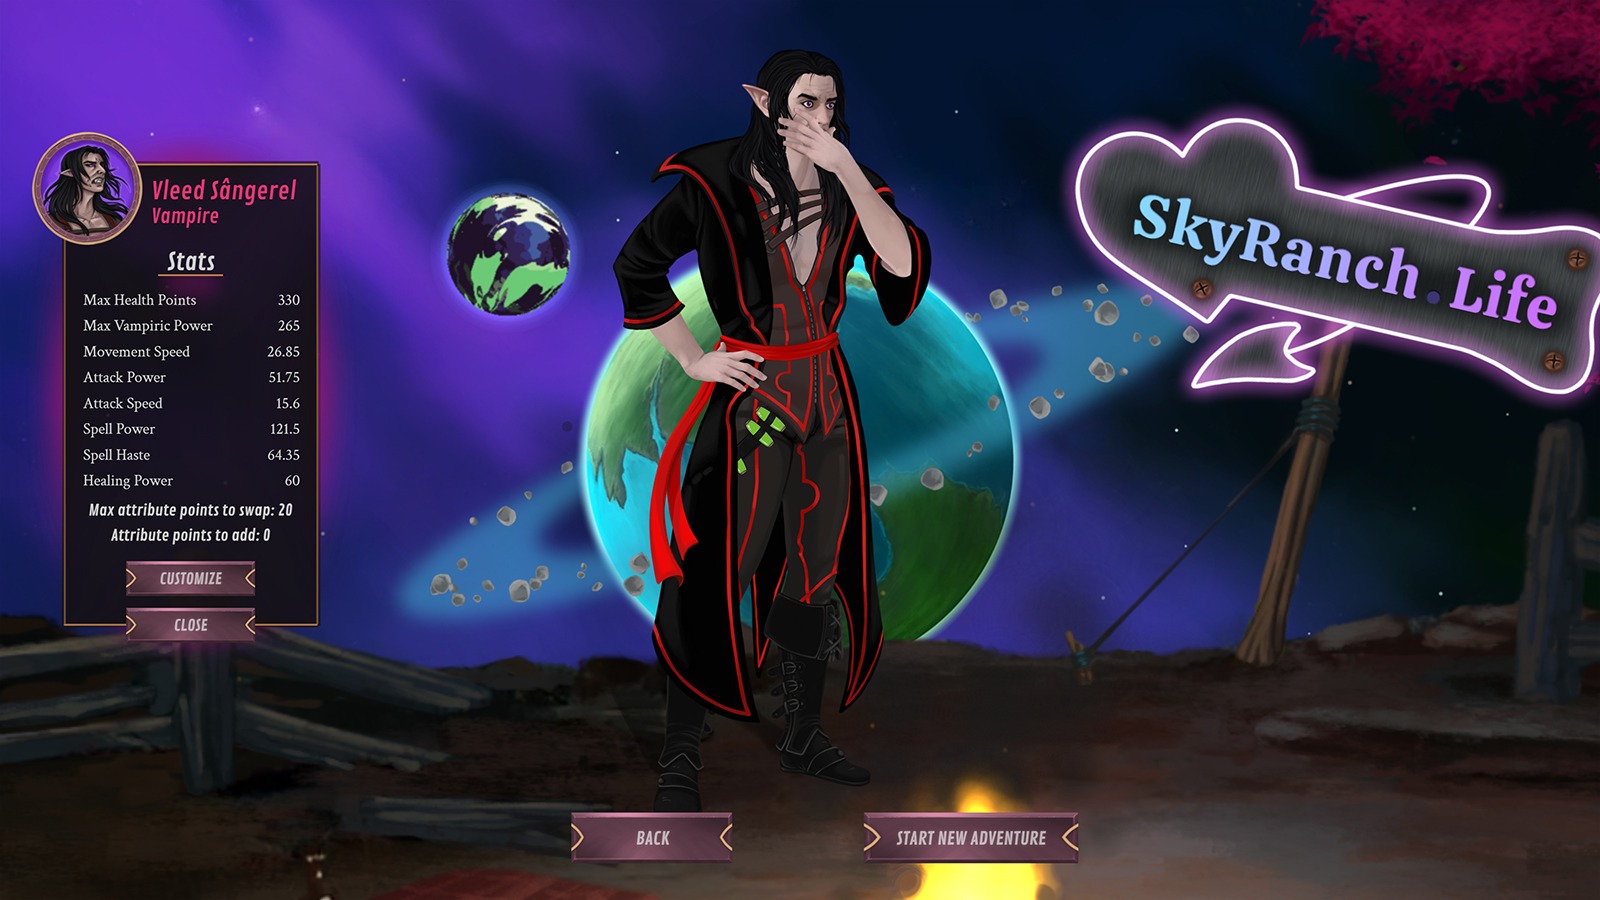 Play SkyRanch.Life for free - an RPG Dating Sim VN